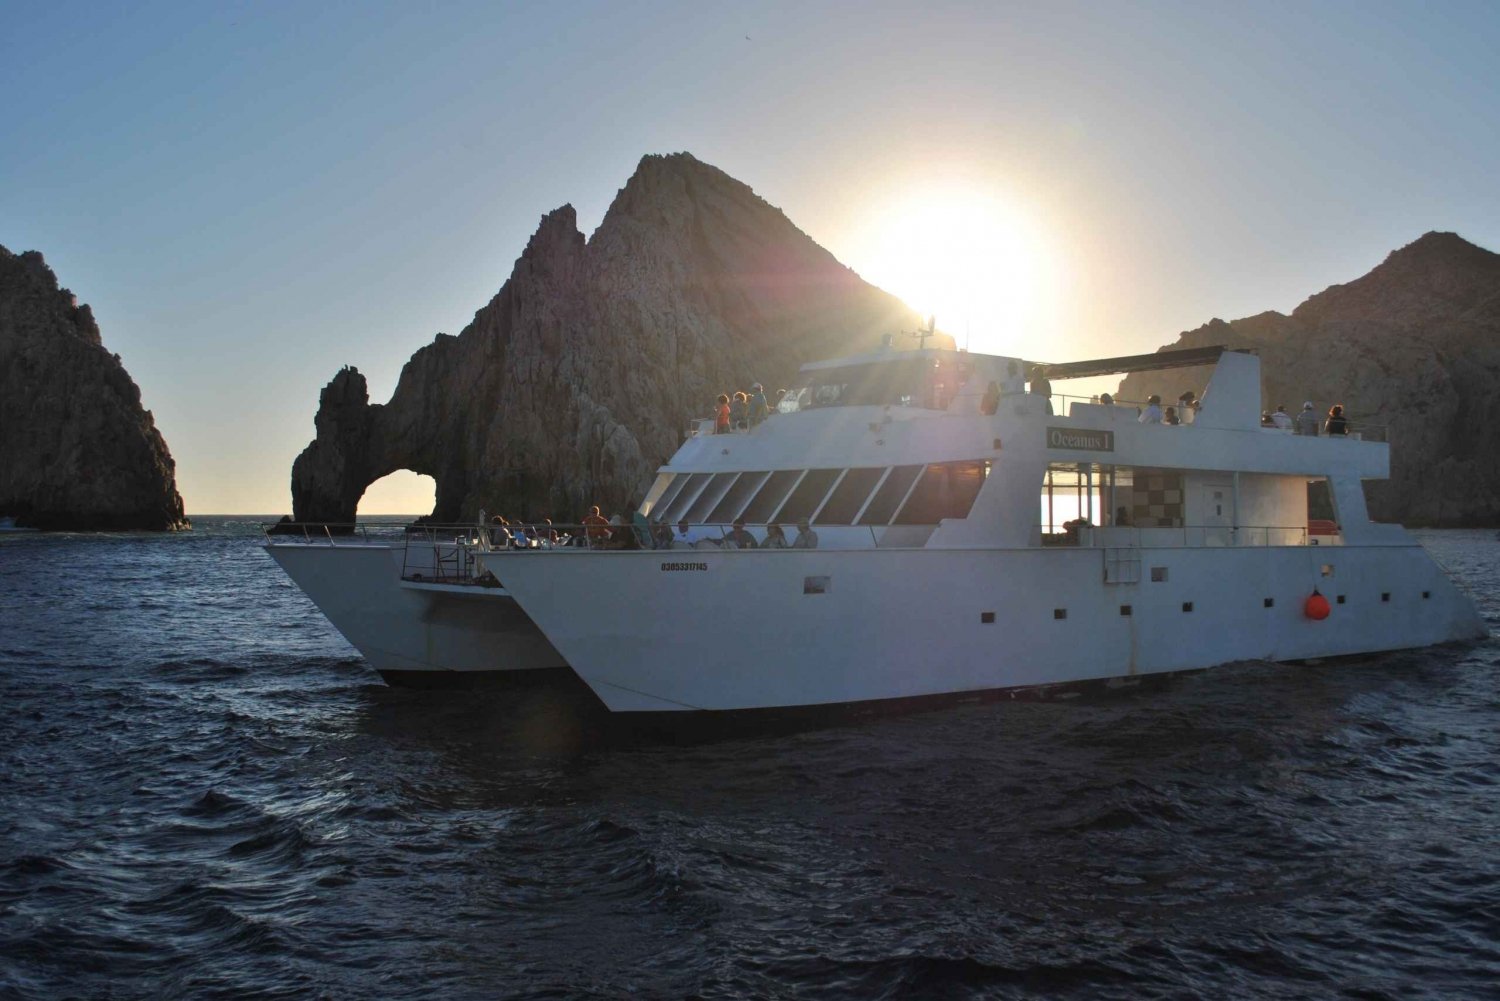 Cabo San Lucas: Sunset Dinner Cruise with Domestic Open Bar